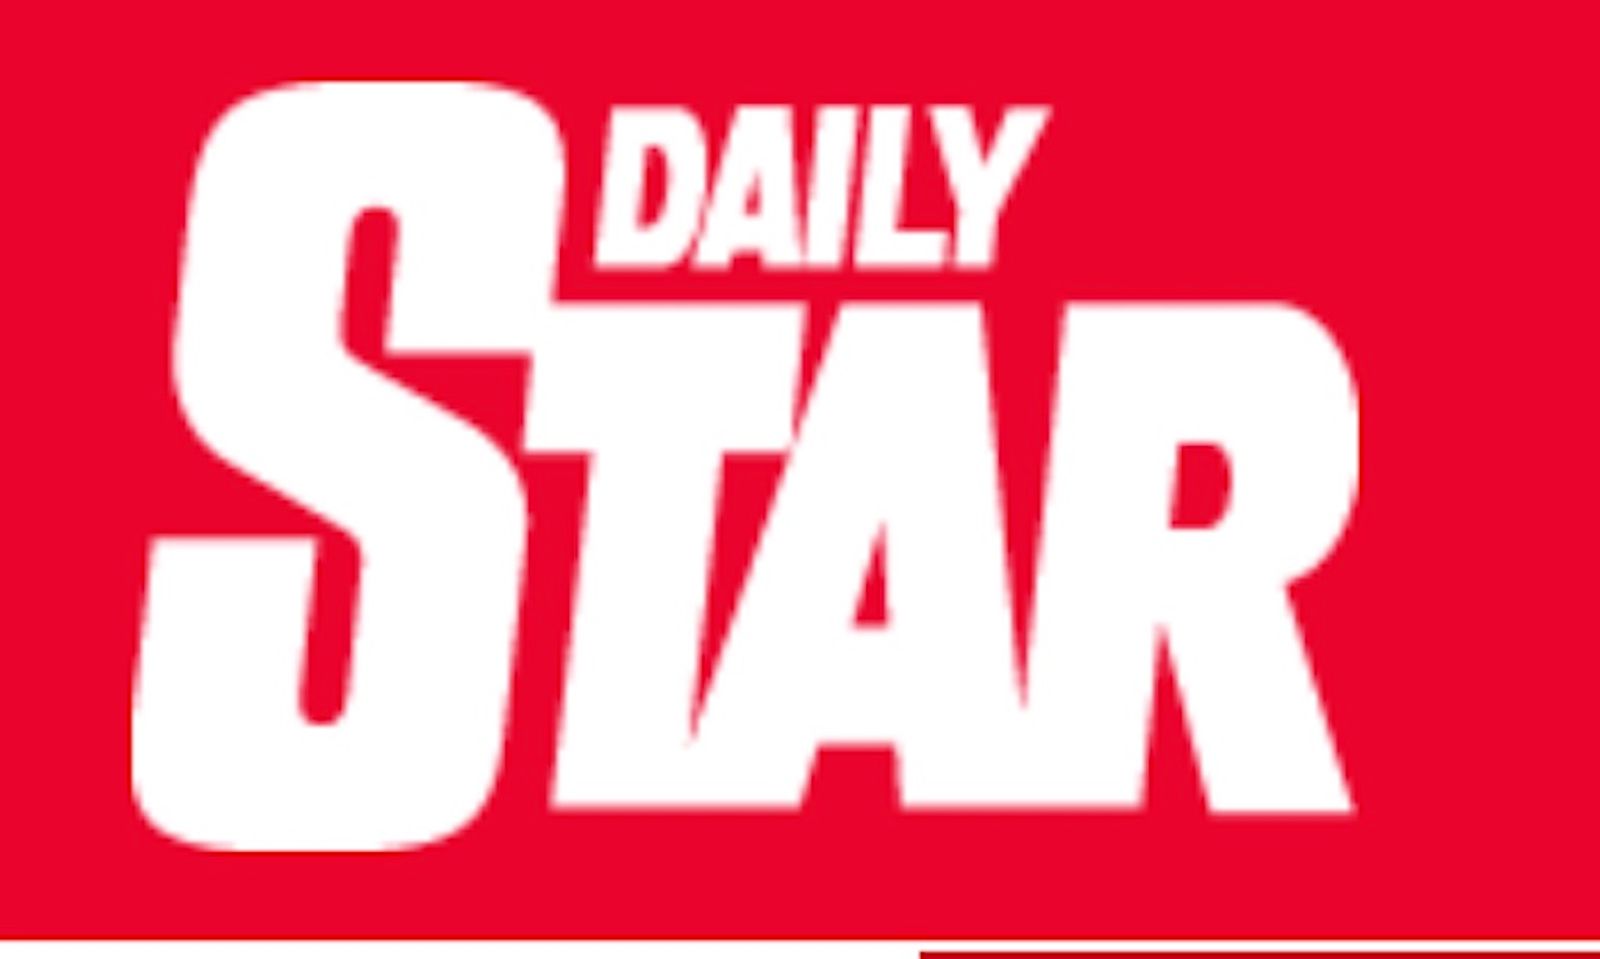 British ‘Daily Star’ Tabloid to Try Ending Topless ‘Page 3 Girl’